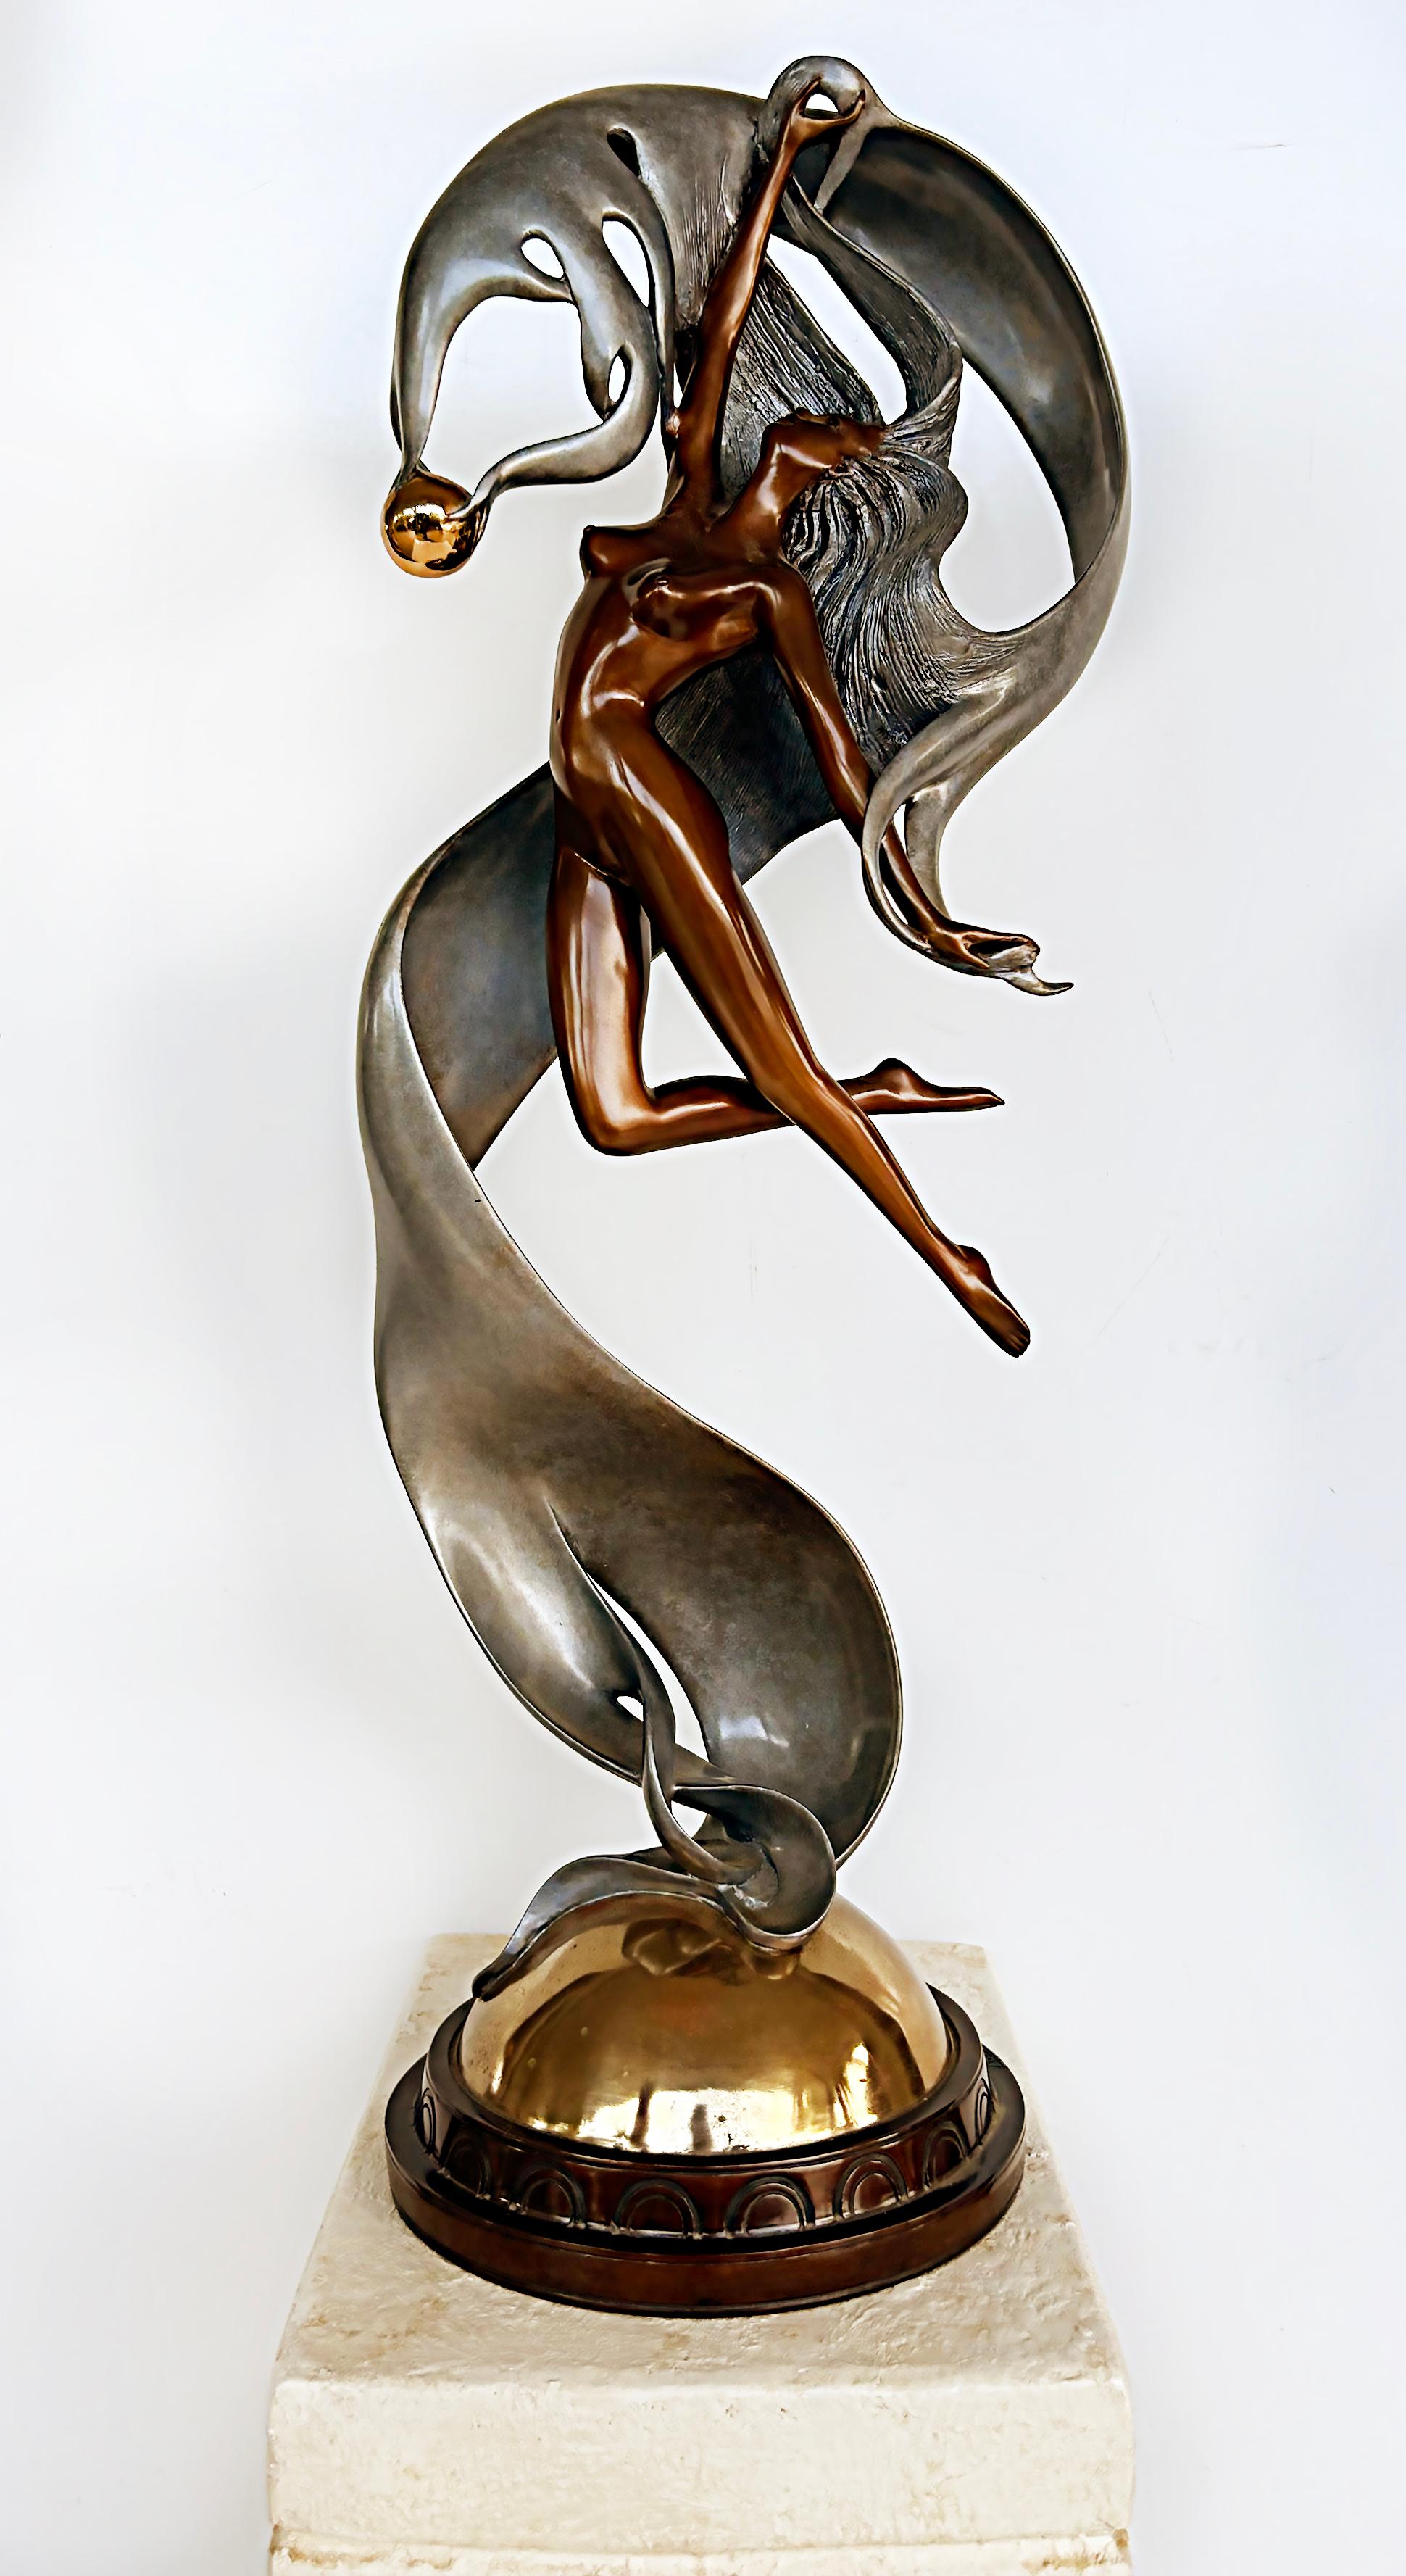 20th Century Angelo Basso Perla Bronze Sculpture Signed, Numbered 124/175